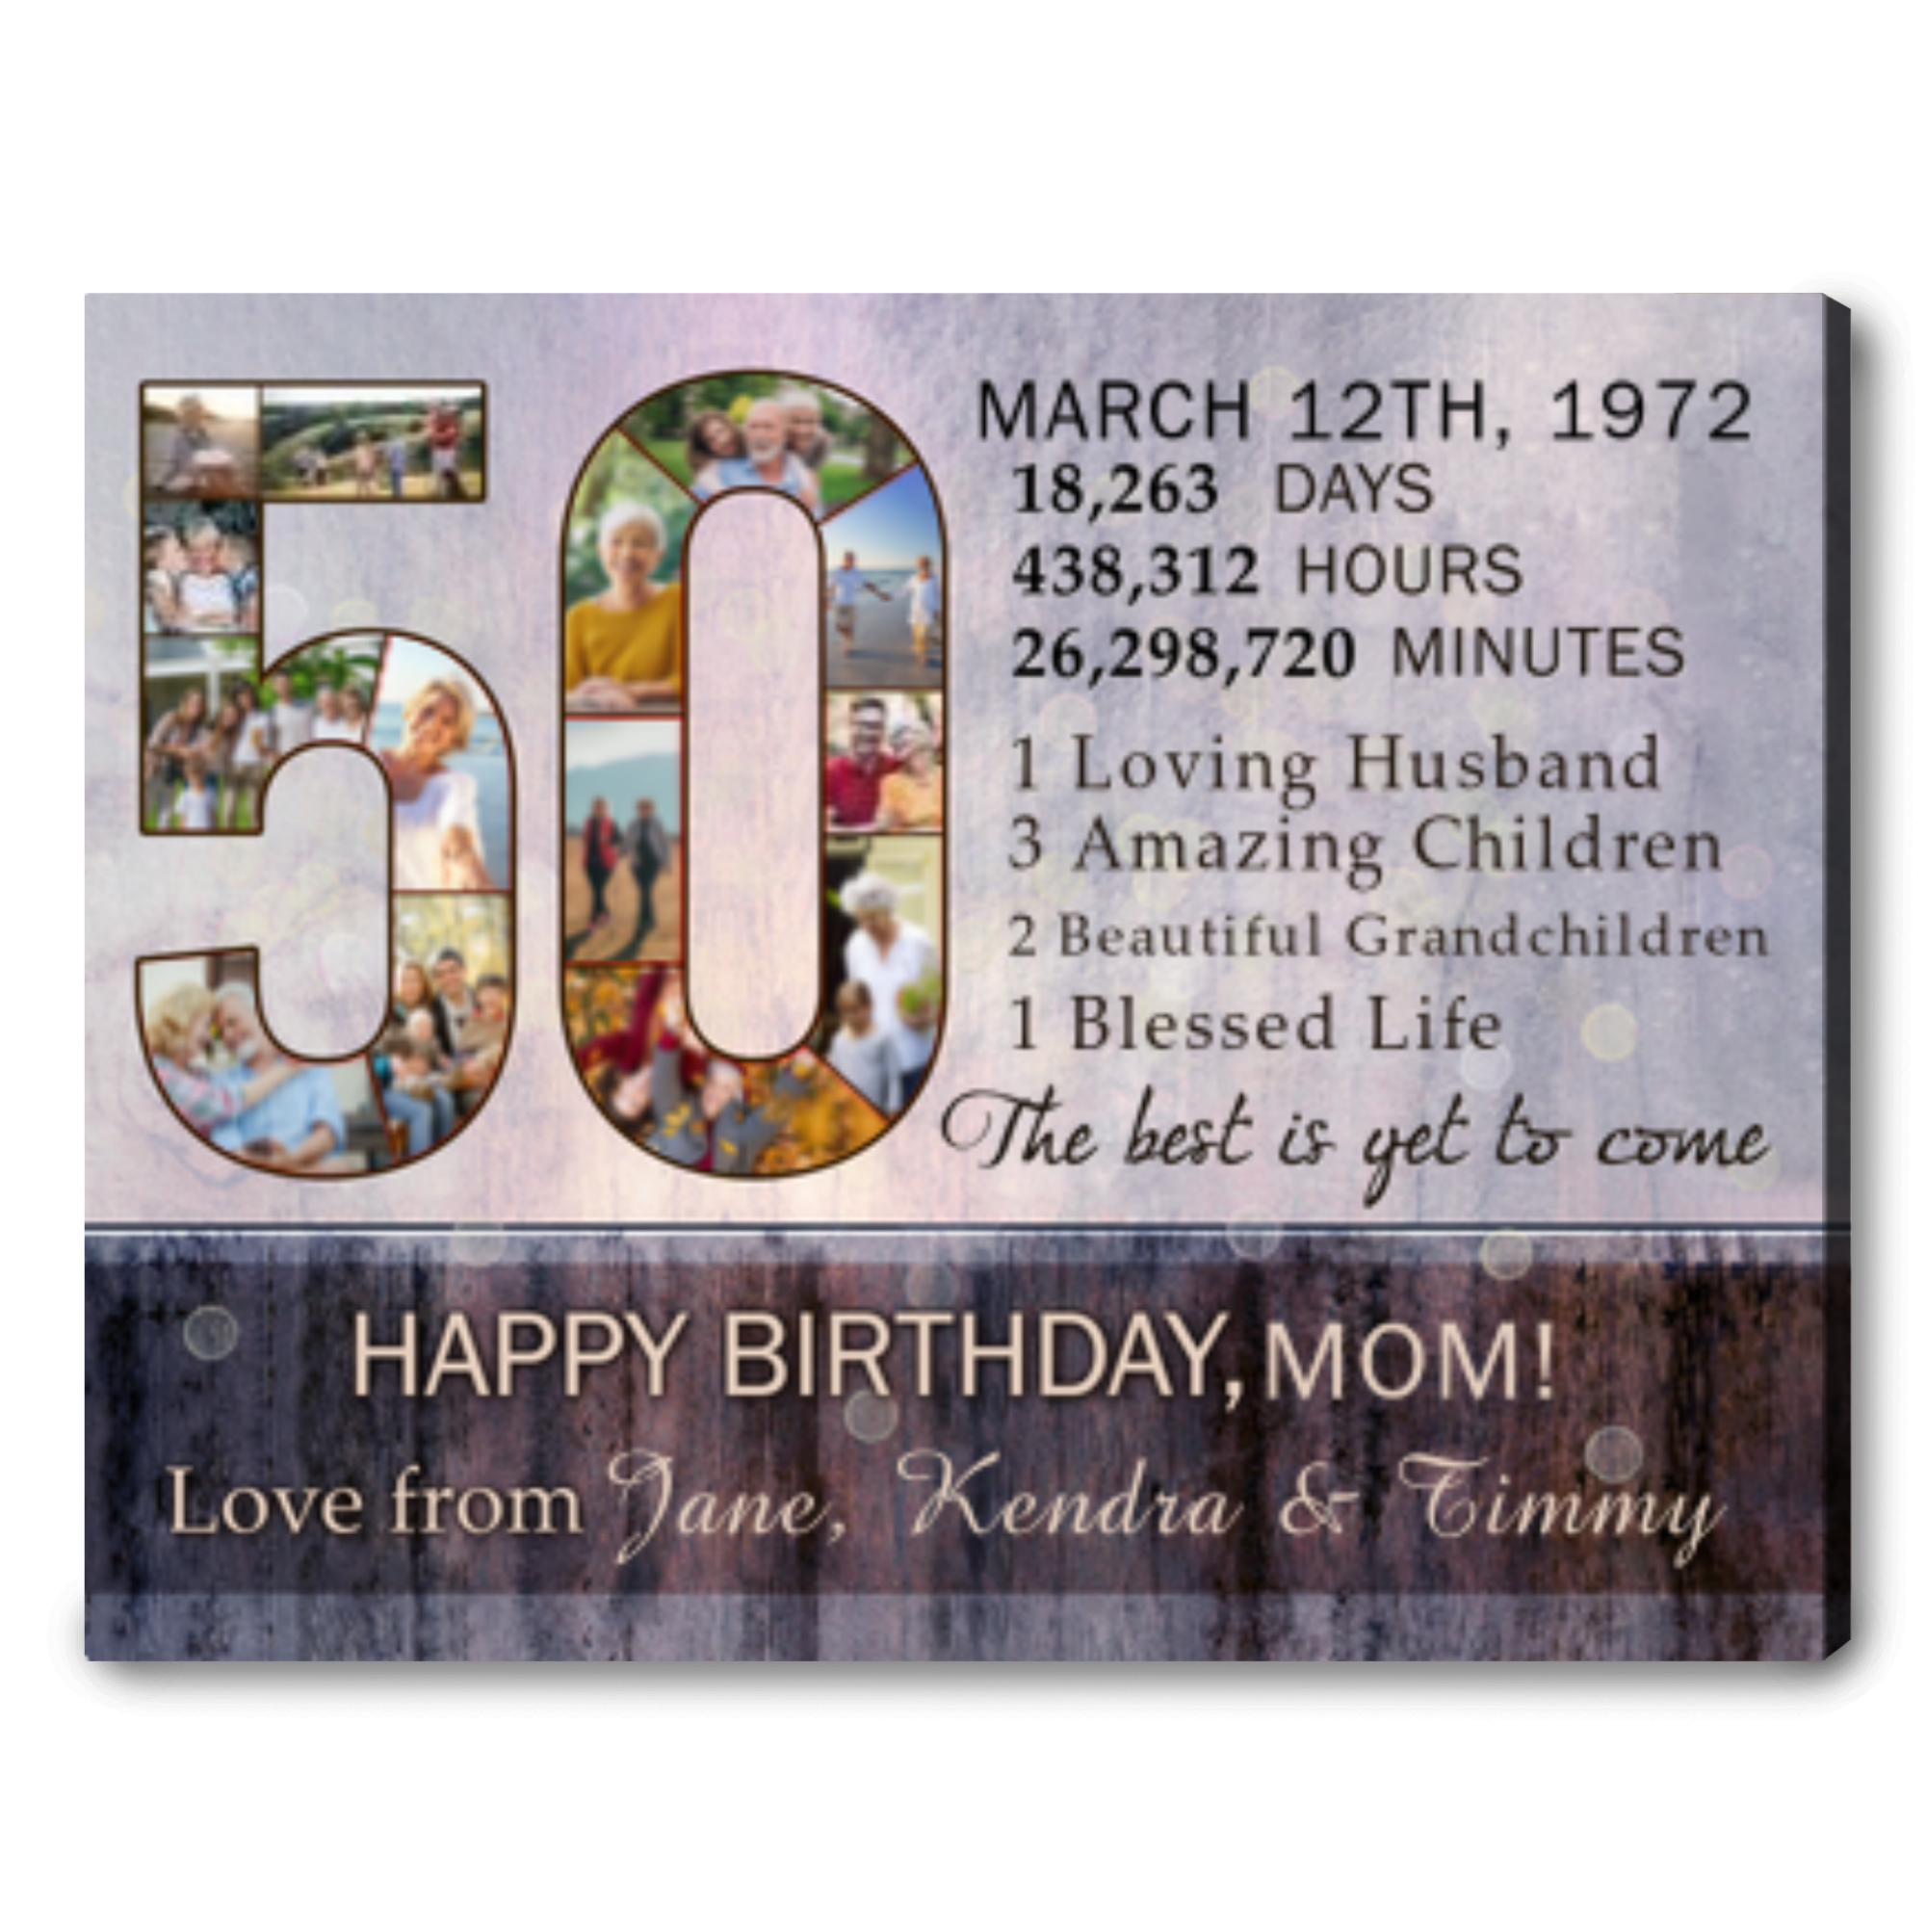 Unique 50th Birthday Gifts For Her Custom Photo Canvas Collage - Oh Canvas